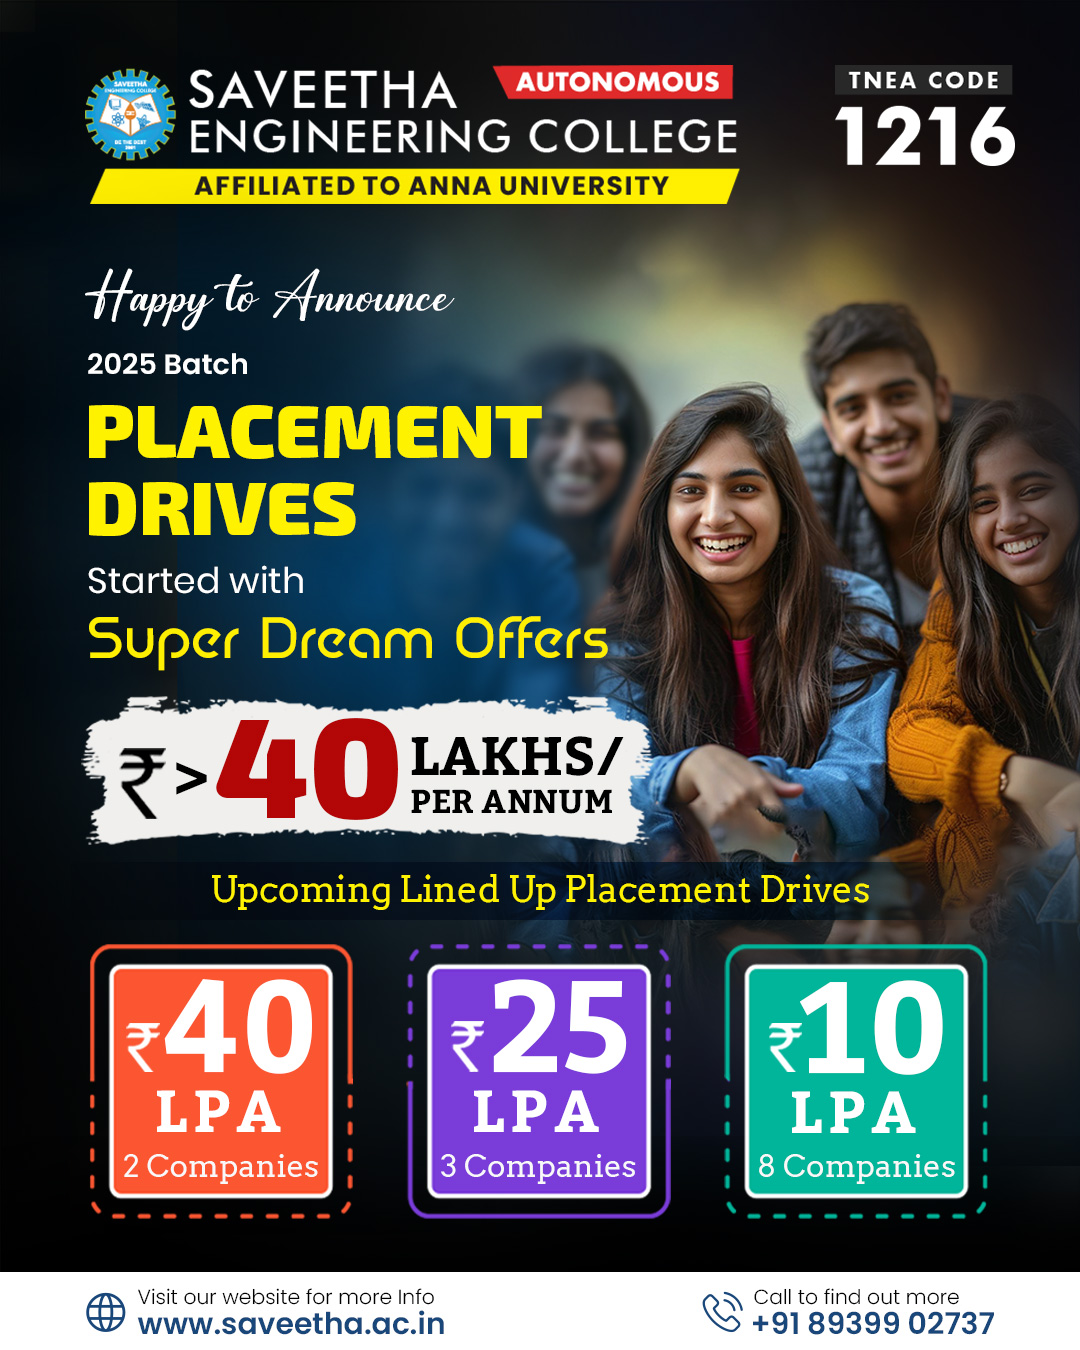 Super Dream Offers with Line Up Placement Drives started at Saveetha Engineering College